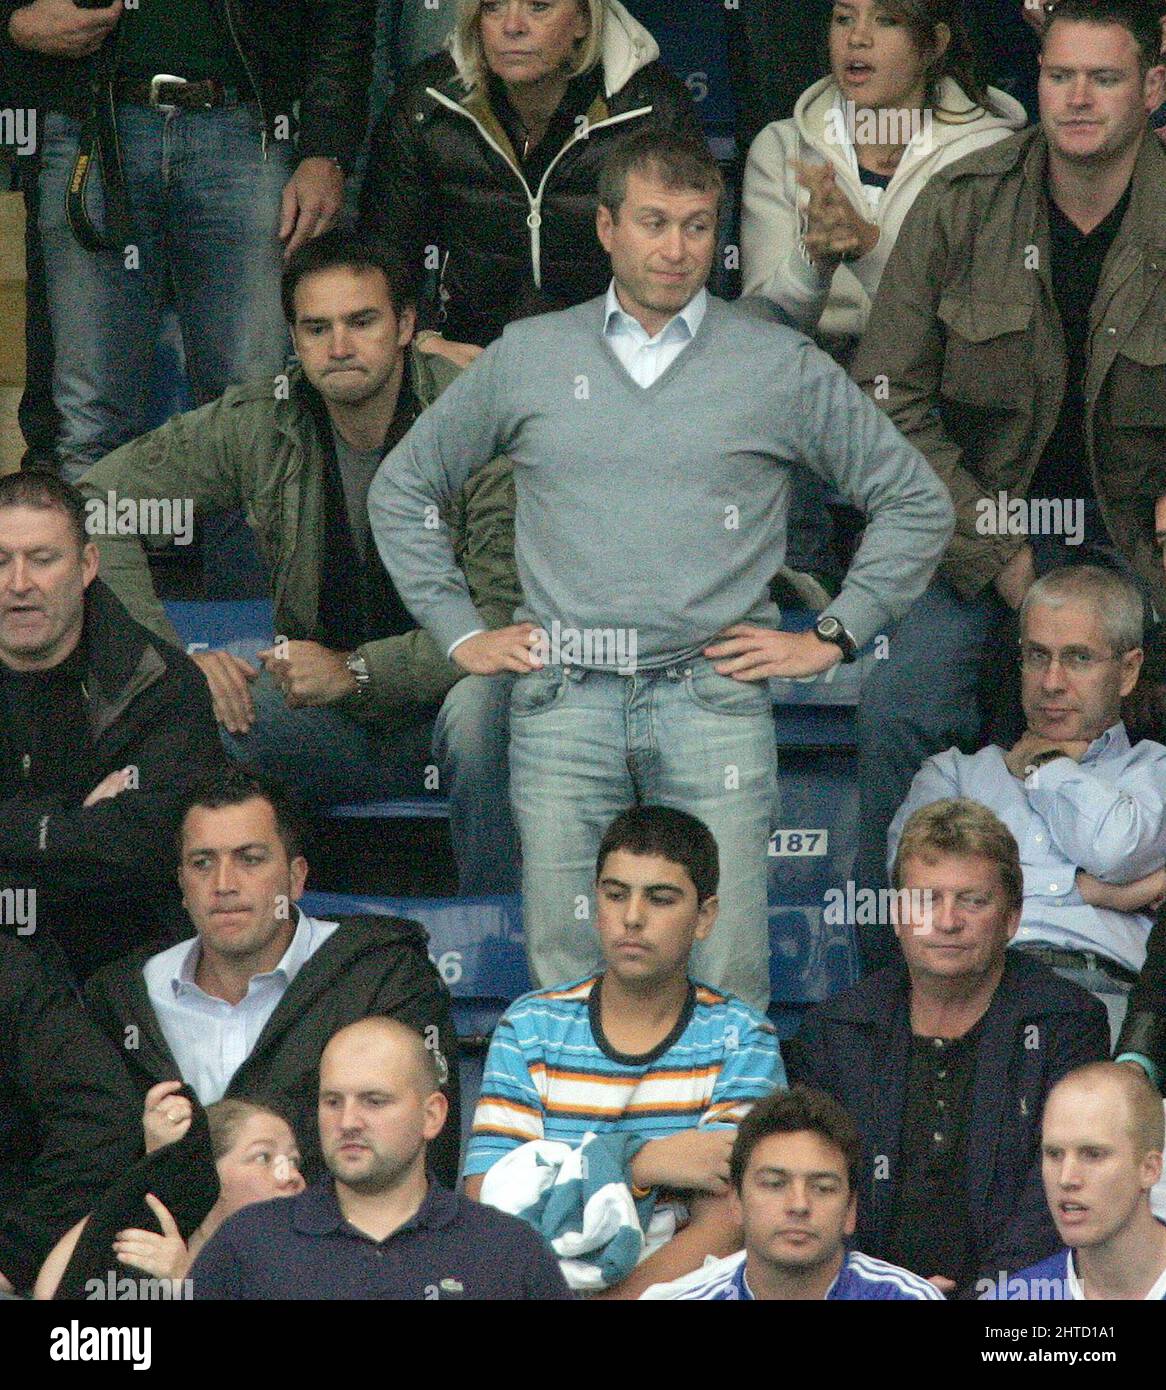 28 February 2022 - ROMAN ABRAMOVICH - CHELSEA FC   FILE PHOTO  Roman Abramovich, sitting with Chelsea fans in the Shed End at Stamford Bridge , shows his frustration at Chelsea's performance Chelsea v Fulham Premier League football Match, Stamford Bridge, London, Britain  - 29 Sep 2007 Picture : © Mark Pain / Alamy Live News Stock Photo